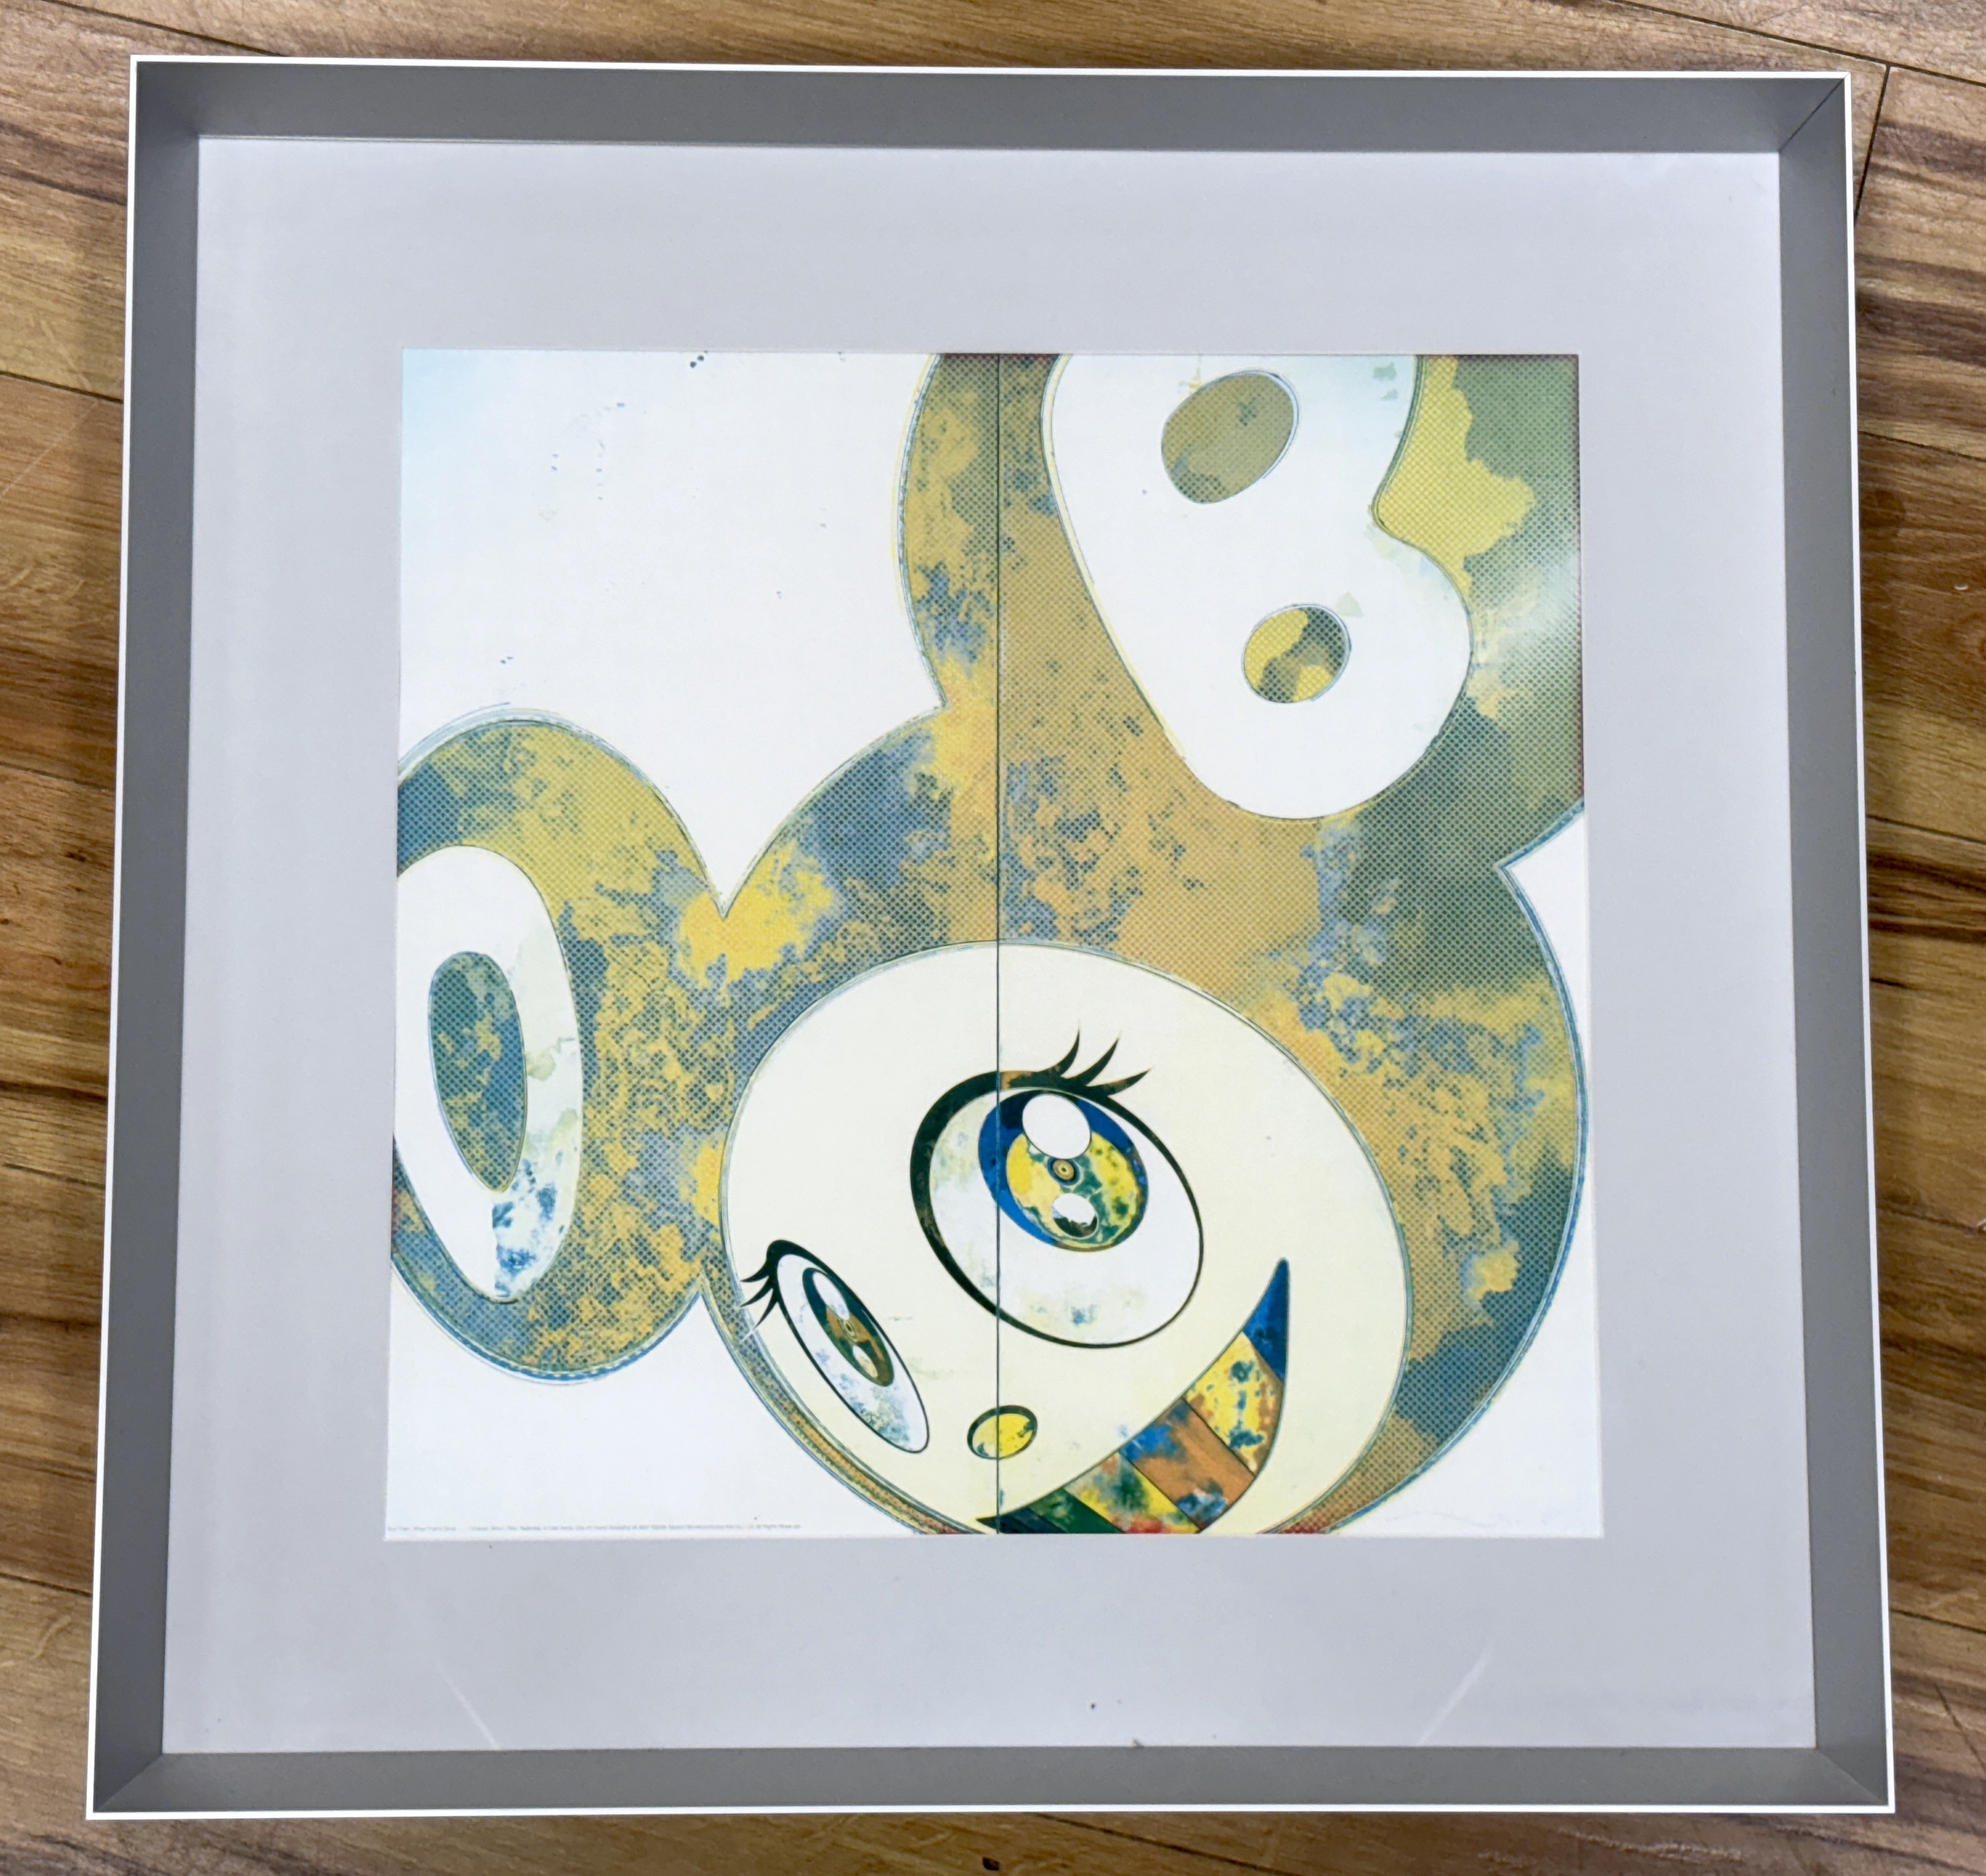 Takashi Murakami (Japanese, b.1962), contemporary offset lithograph in colours, 'And then, when that's done', signed, limited edition 168/300, publ. by Kaikai Kiki Co, 49 x 49cm